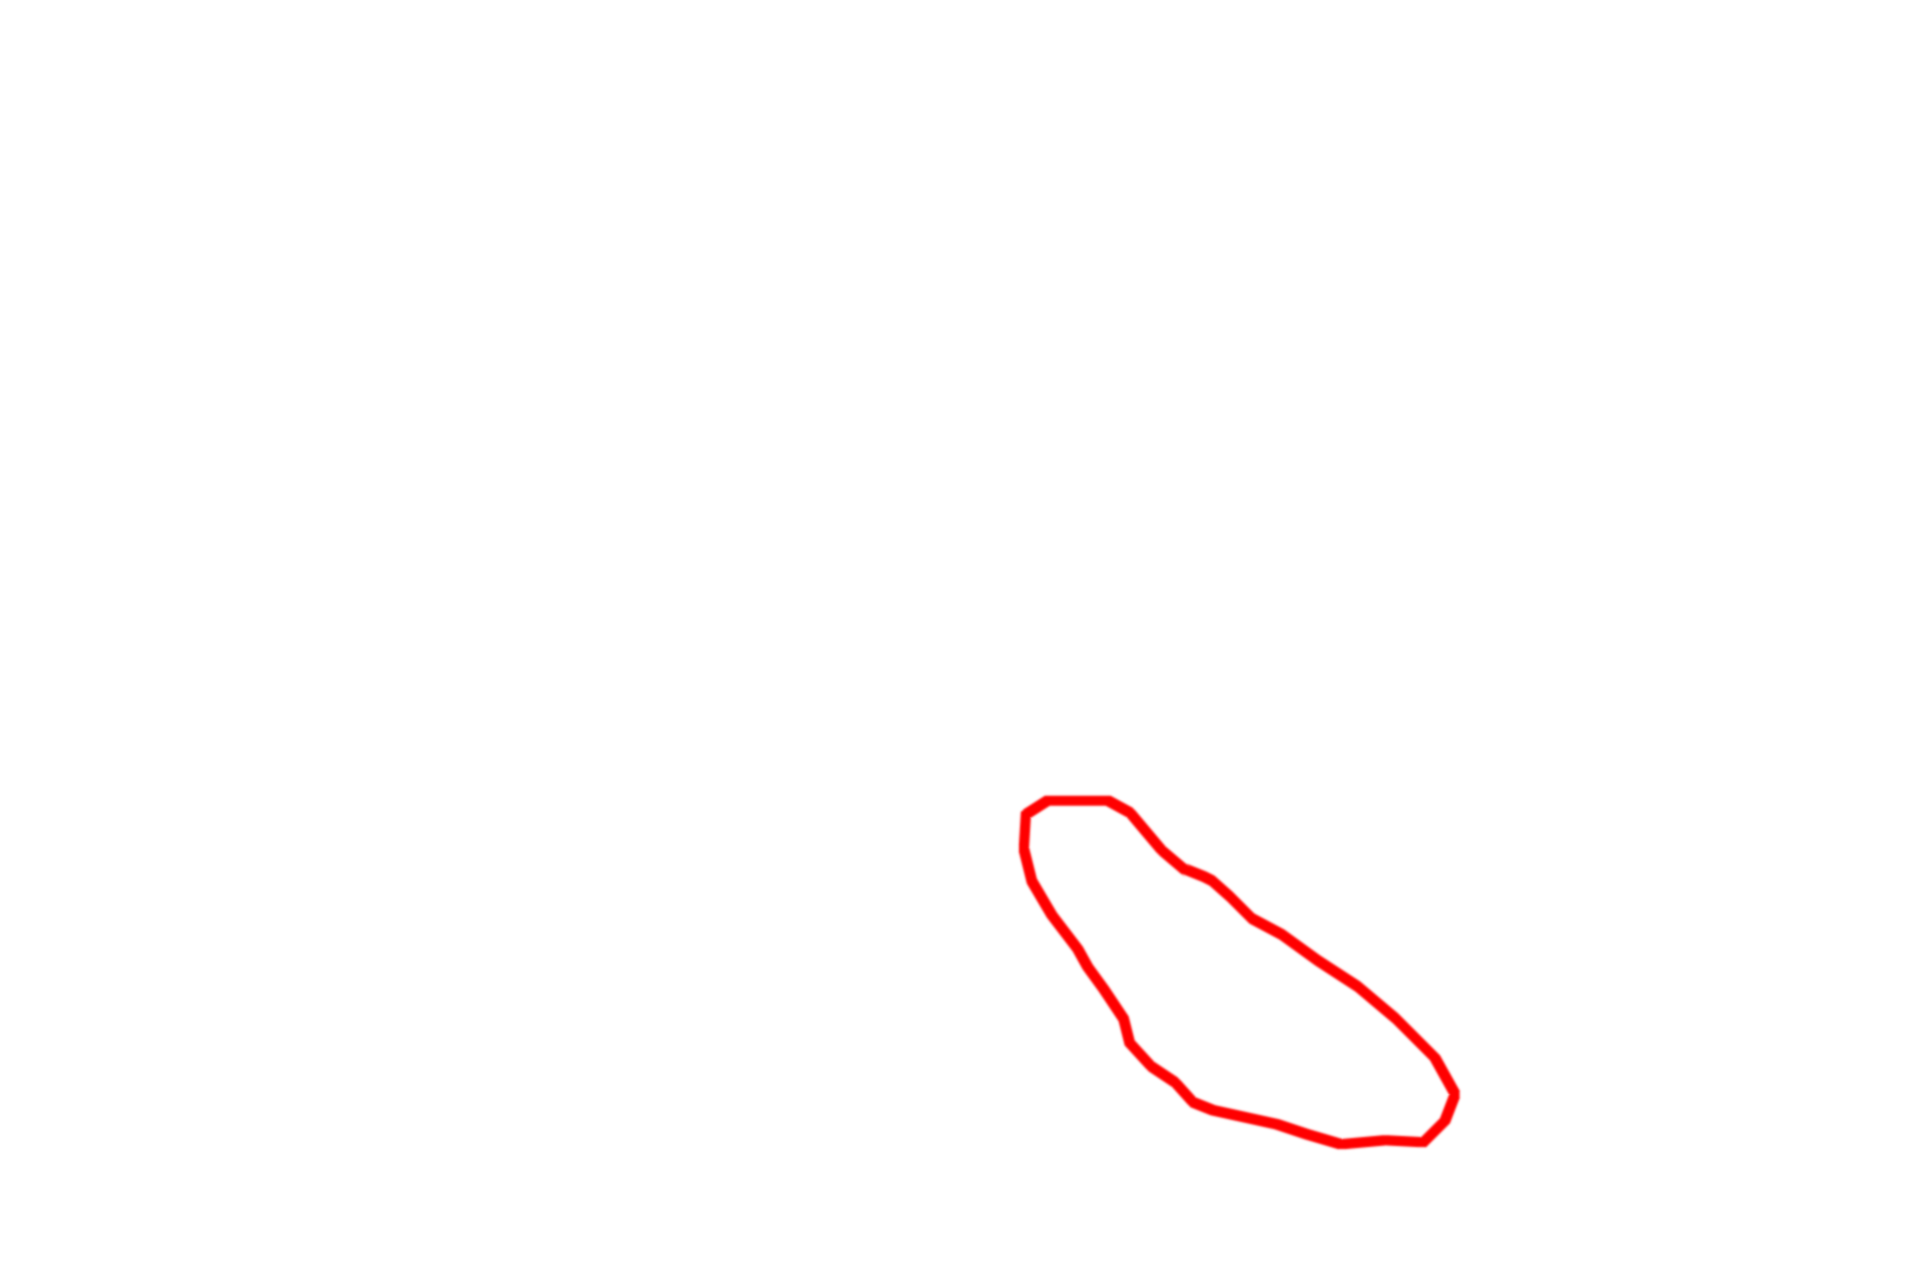  - Trans Golgi network <p>The Golgi consists of stacks of smooth, flattened membranous sacs (cisternae), usually located near the nucleus.  Newly synthesized proteins are transferred from the RER by transport vesicles, which fuse with the forming, or cis, face of the Golgi.  From there, proteins move through the mid-Golgi where they are modified, and eventually exit in vesicles from the maturing, or trans, face.  The collection of these vesicles forms the trans-Golgi network along with microtubules for transport throughout the cell.  25,000x</p>
